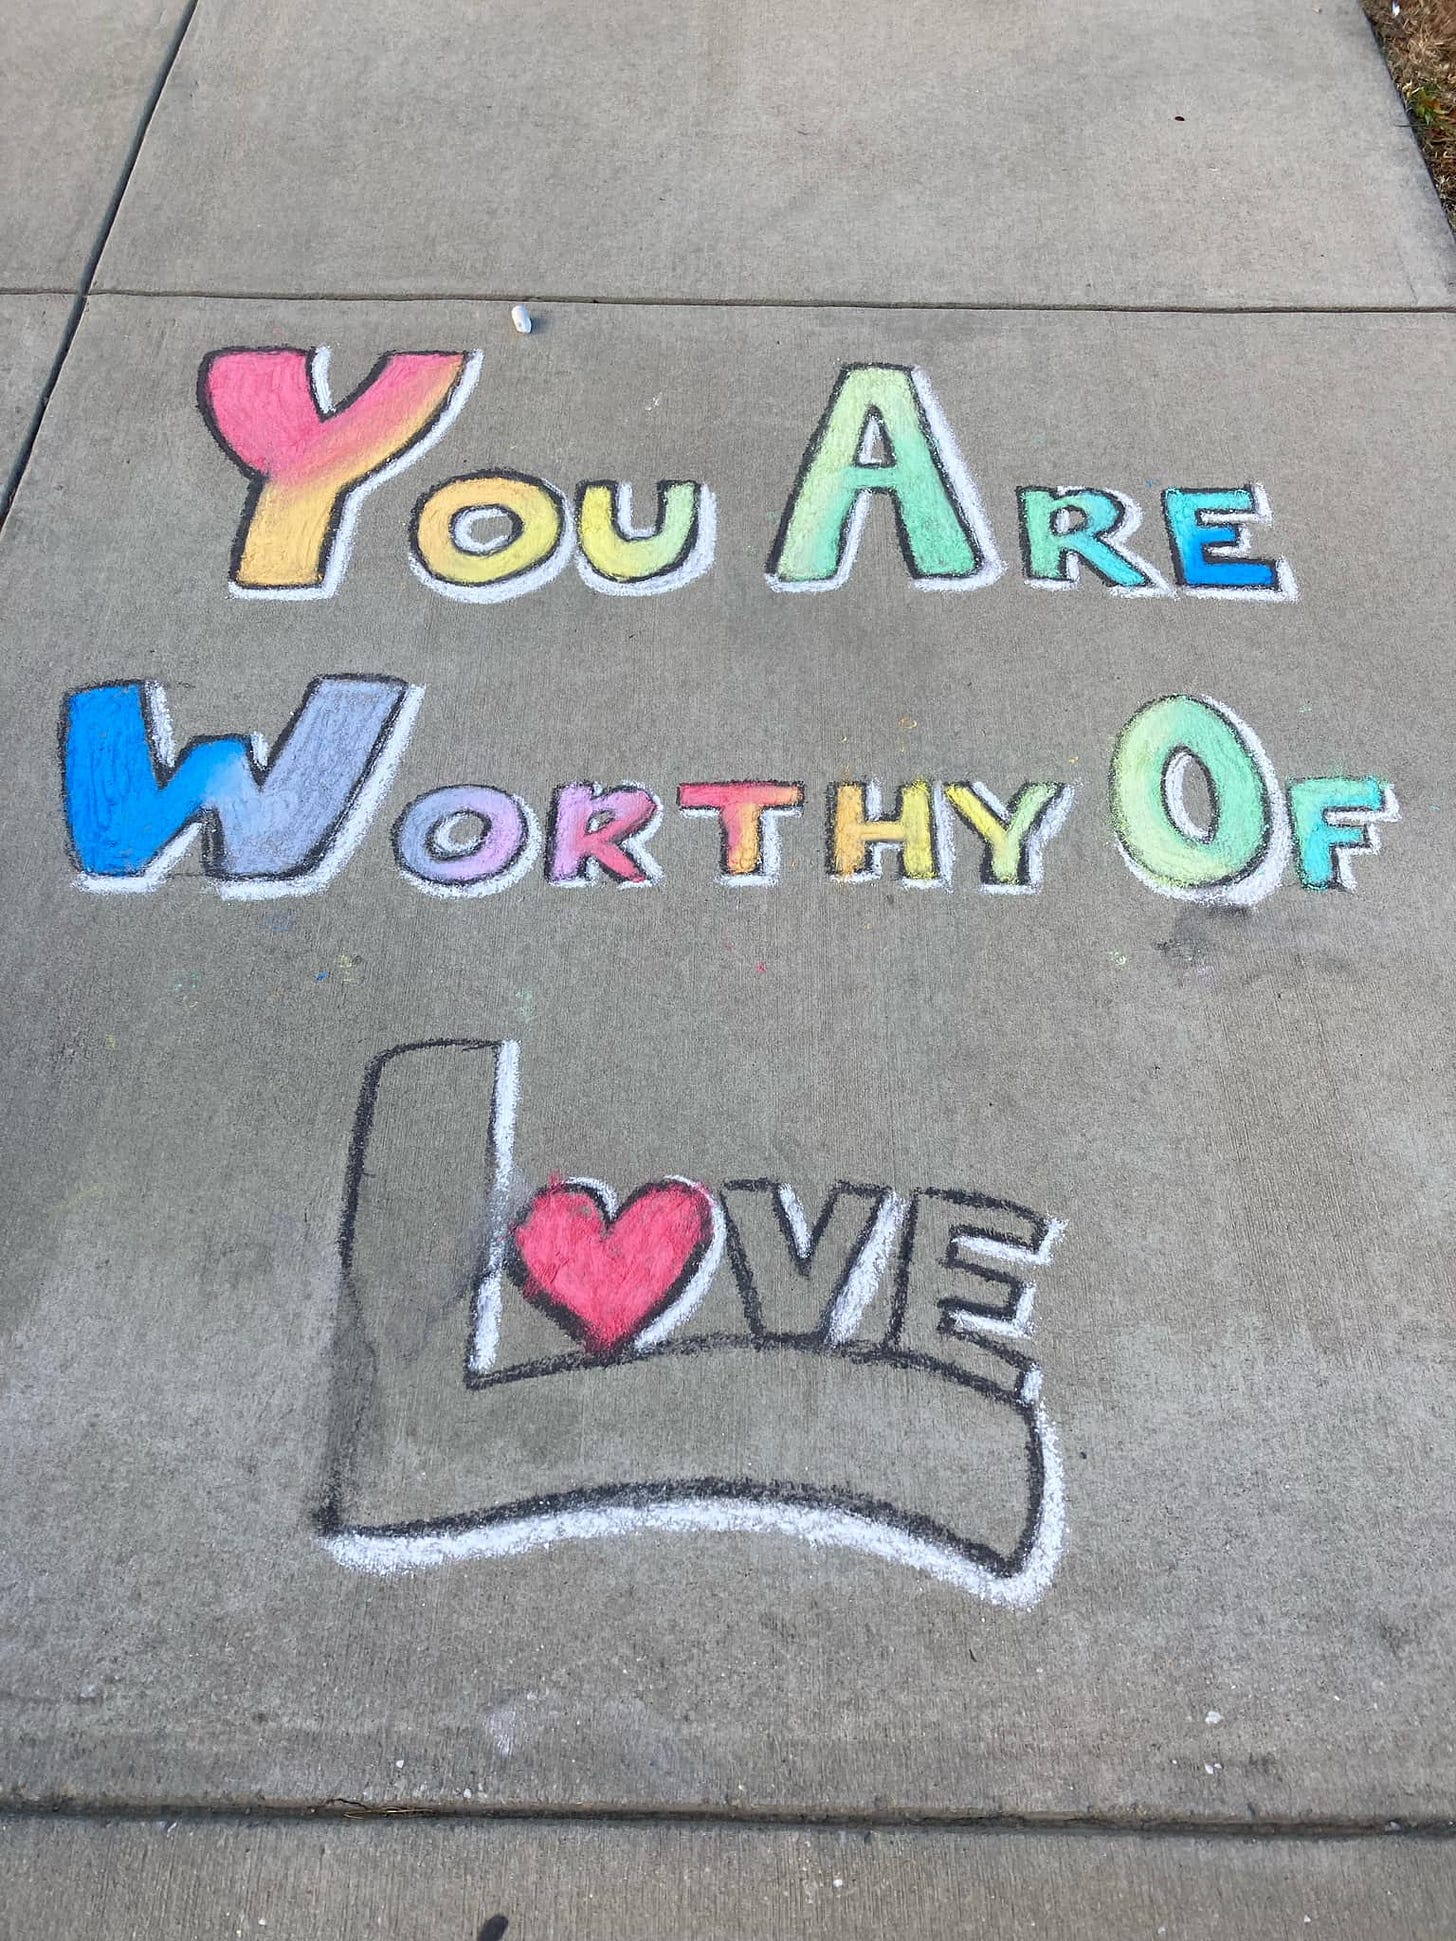 May be an image of text that says 'You ARE RE WORTHY OF LOVE OVE'